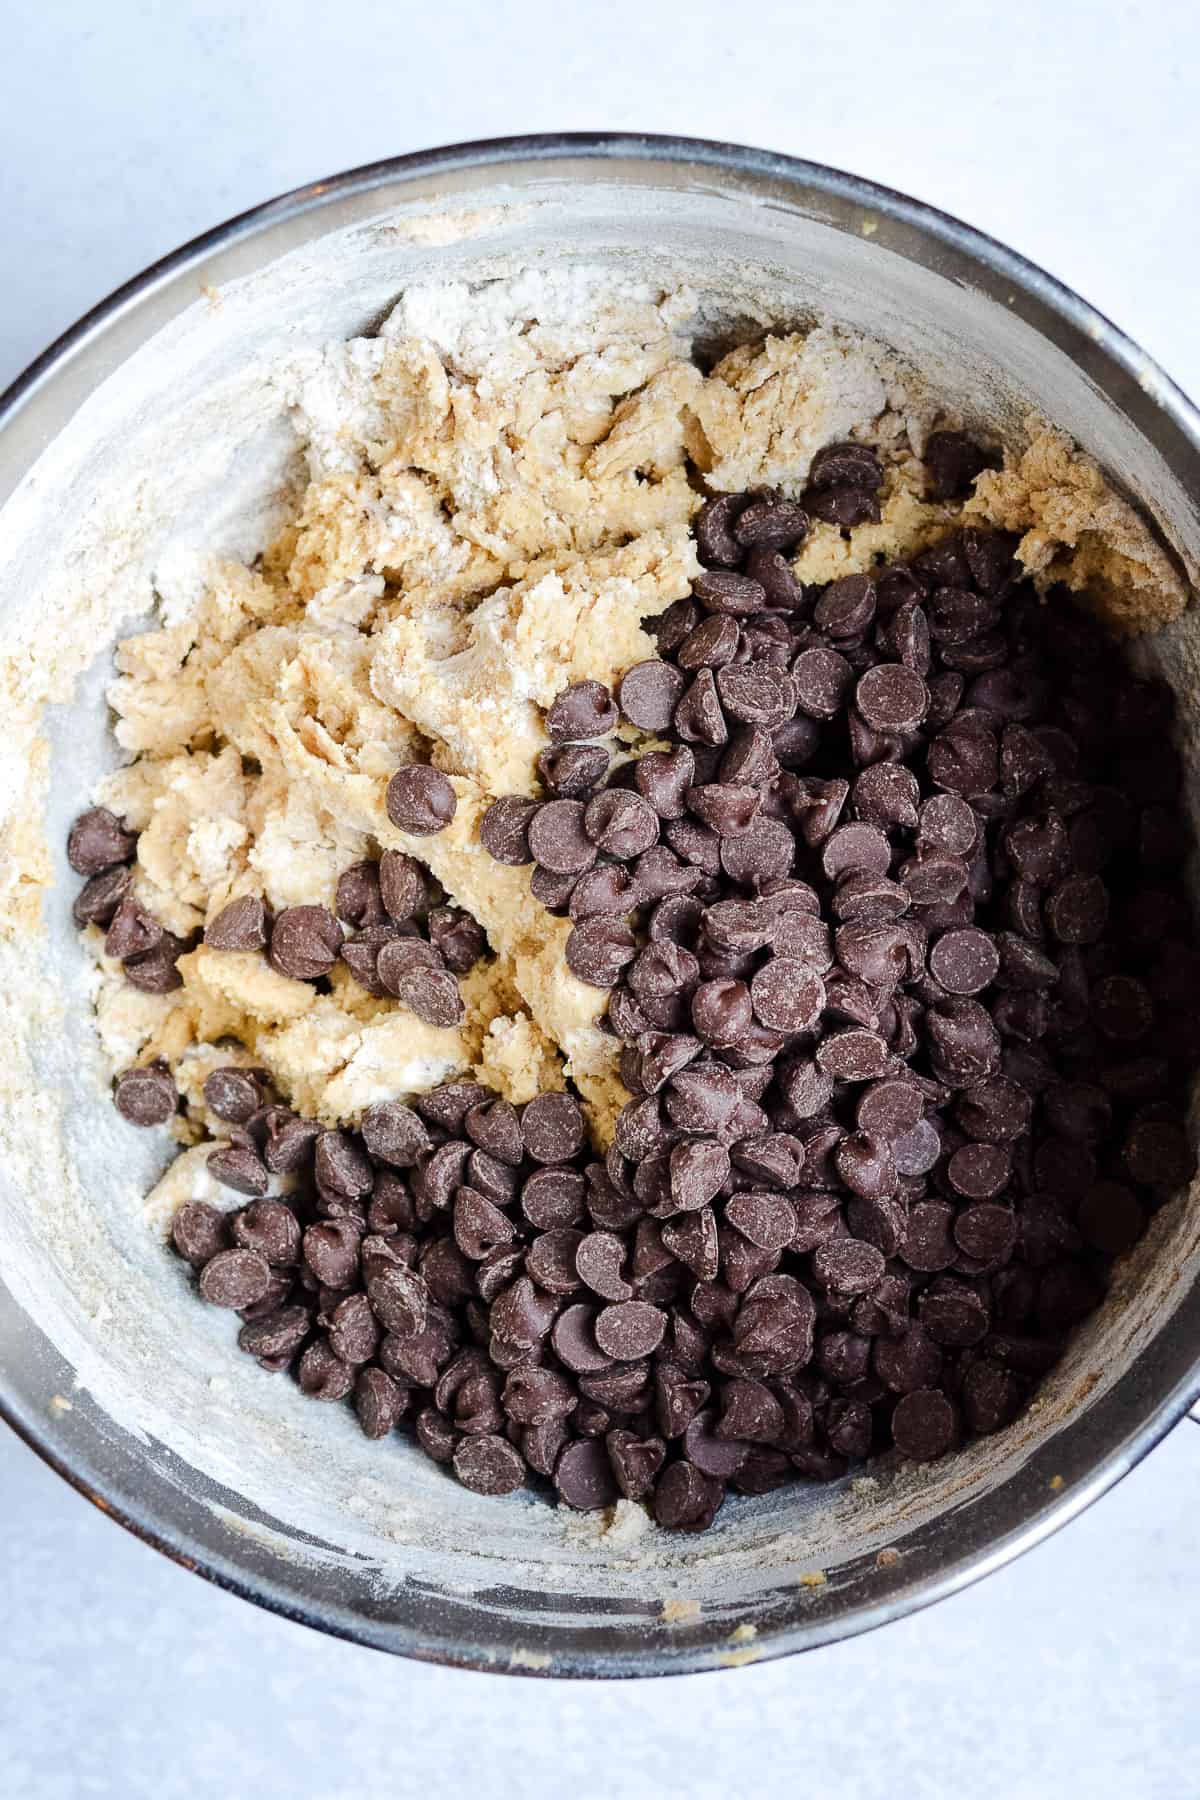 Mixed dough with chocolate chips ready to be mixed in.